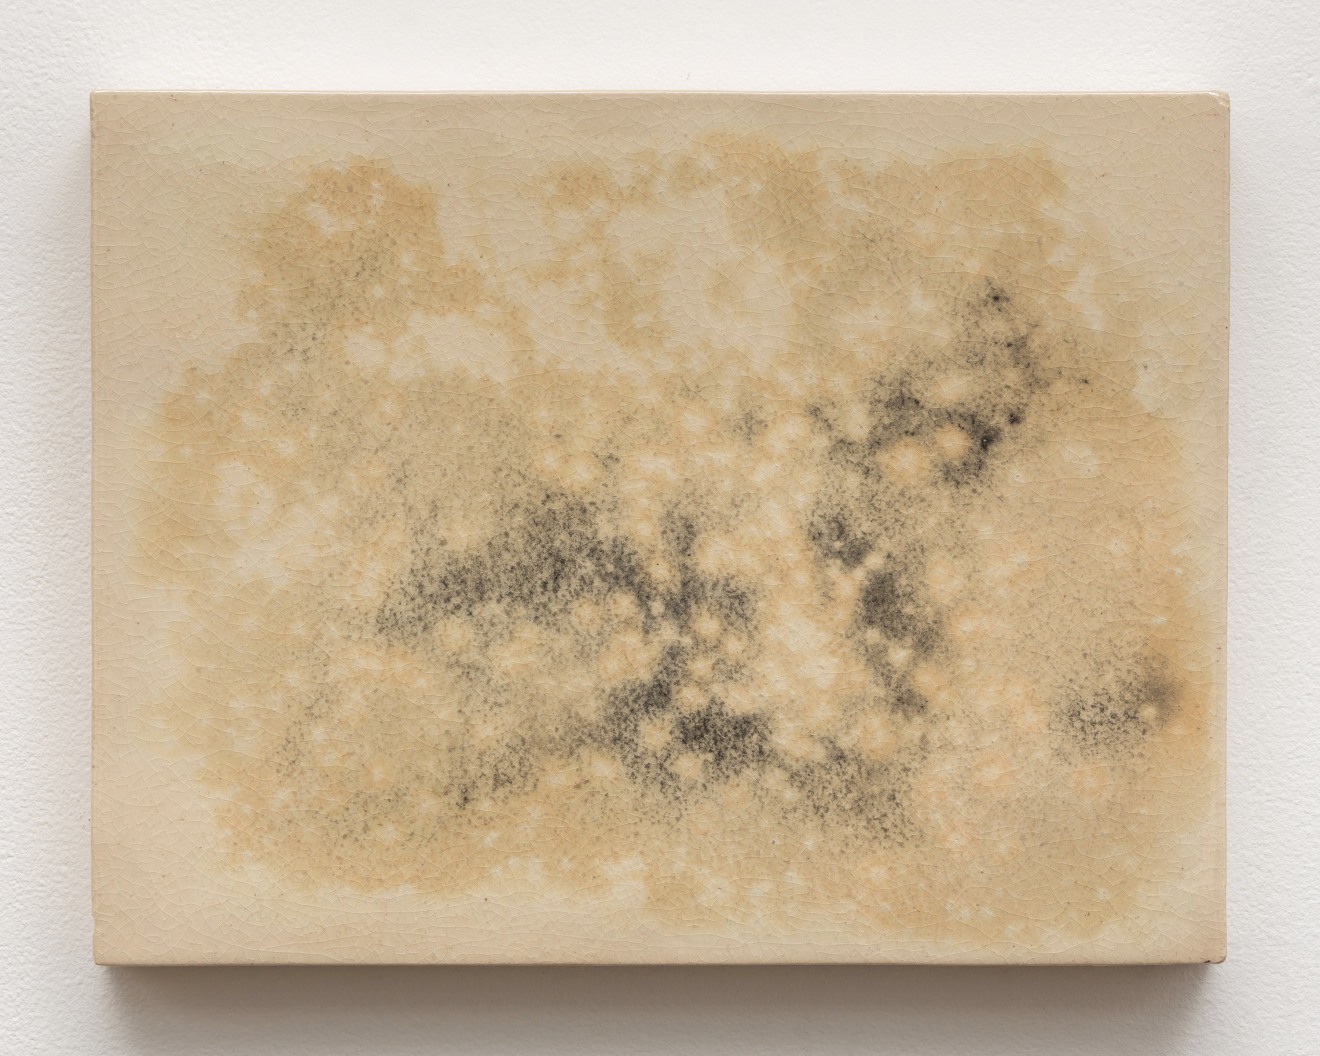 Mai-Thu Perret Morning comes, everywhere&rsquo;s the same, rain on a thousand houses, 2014